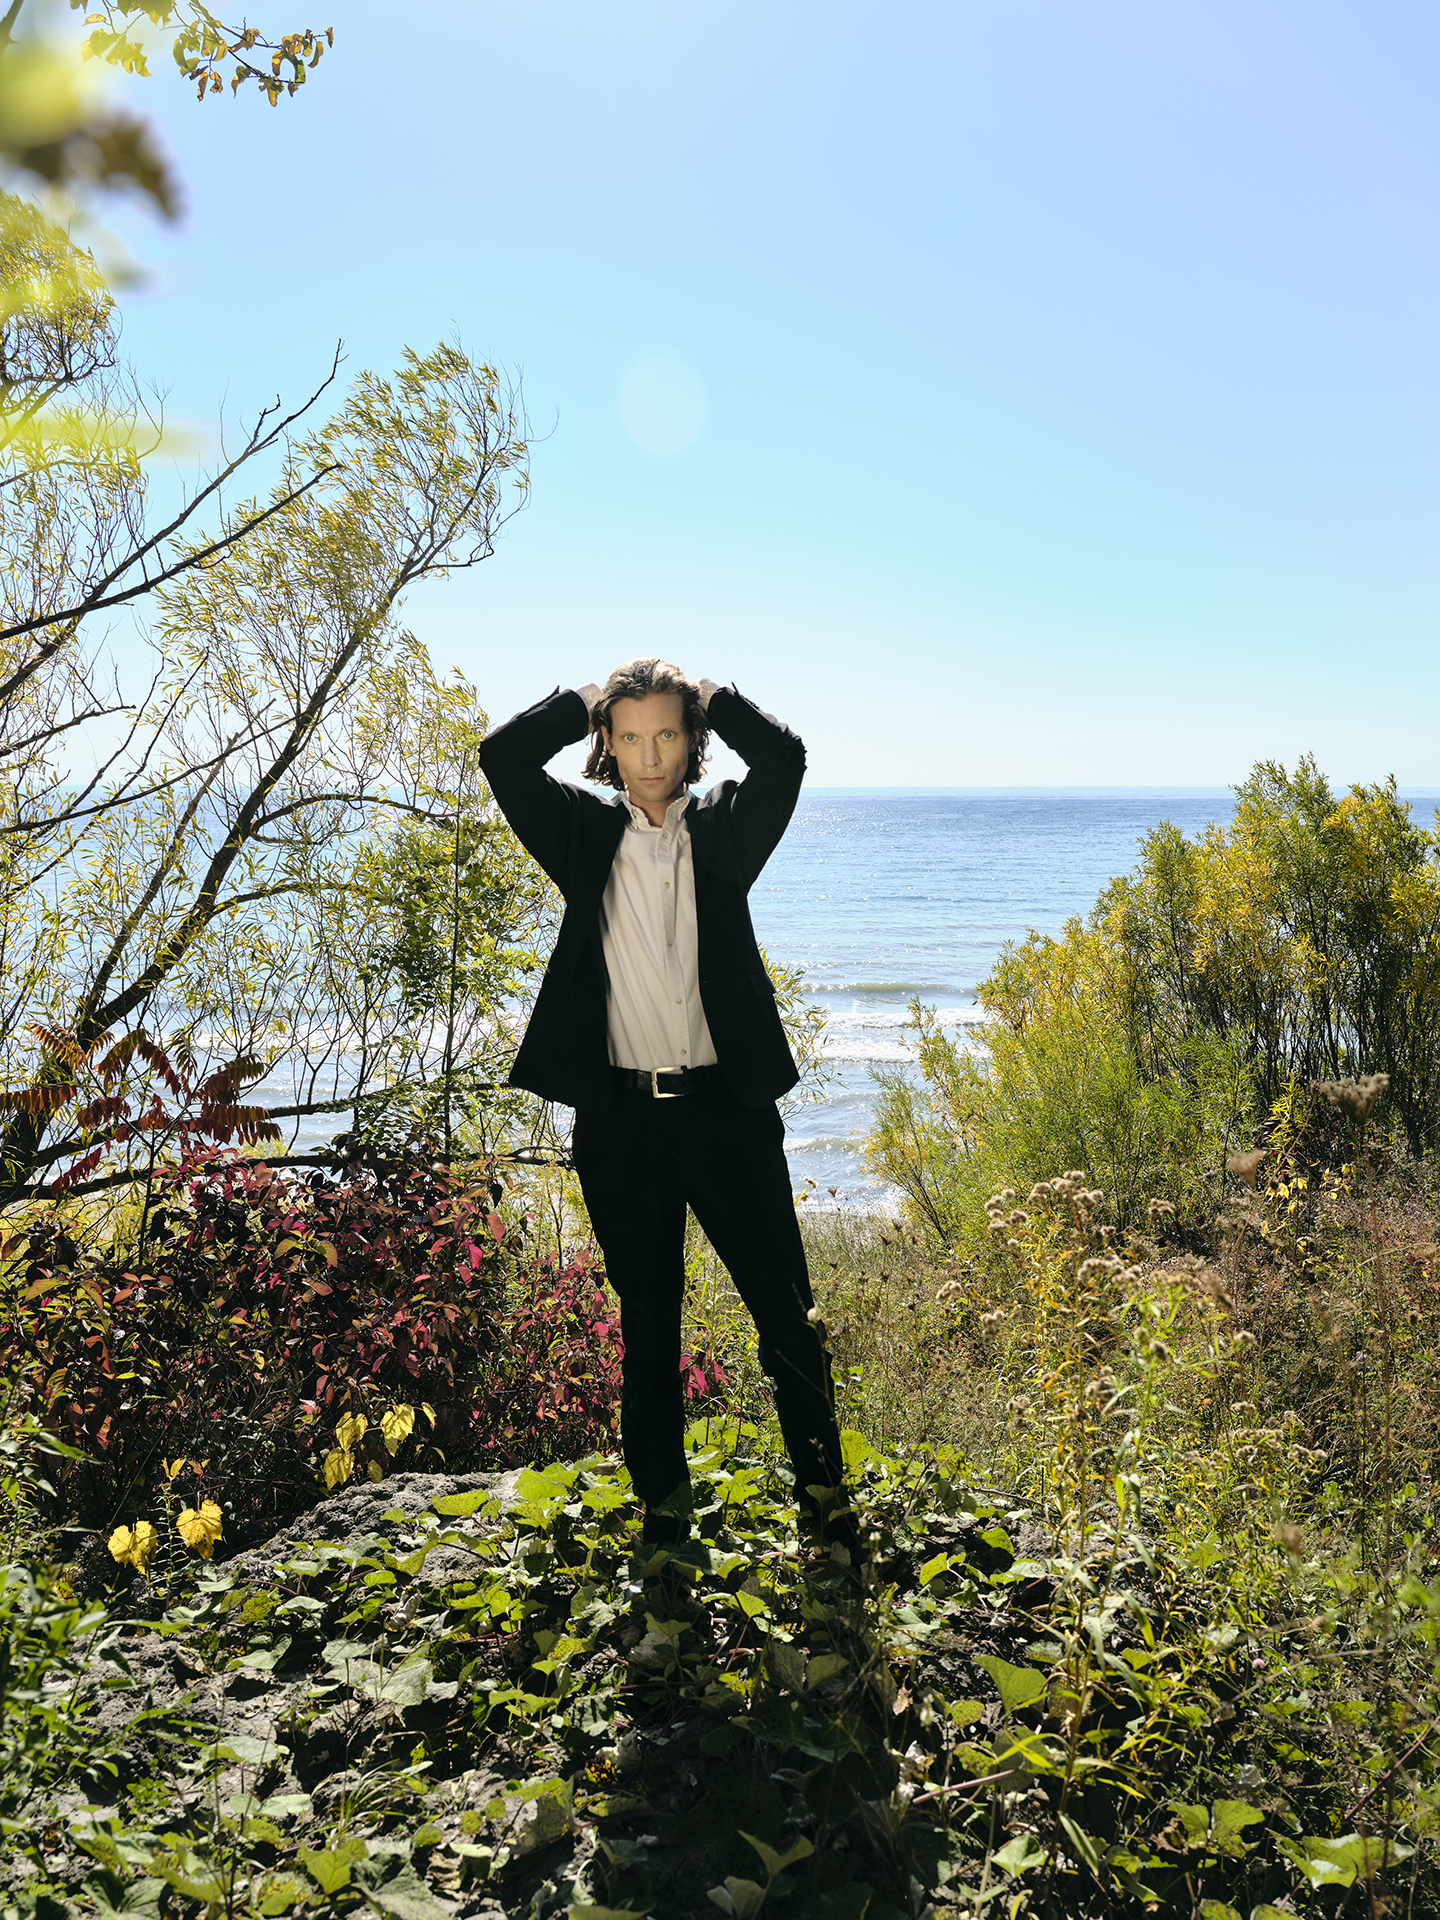 In this image, a male subject is standing centered in the composition wearing a black suit and white button up with both hands in his hair. He is standing on top of a cliff surrounded by greenery and plants. Behind him is a lake that goes to the horizon